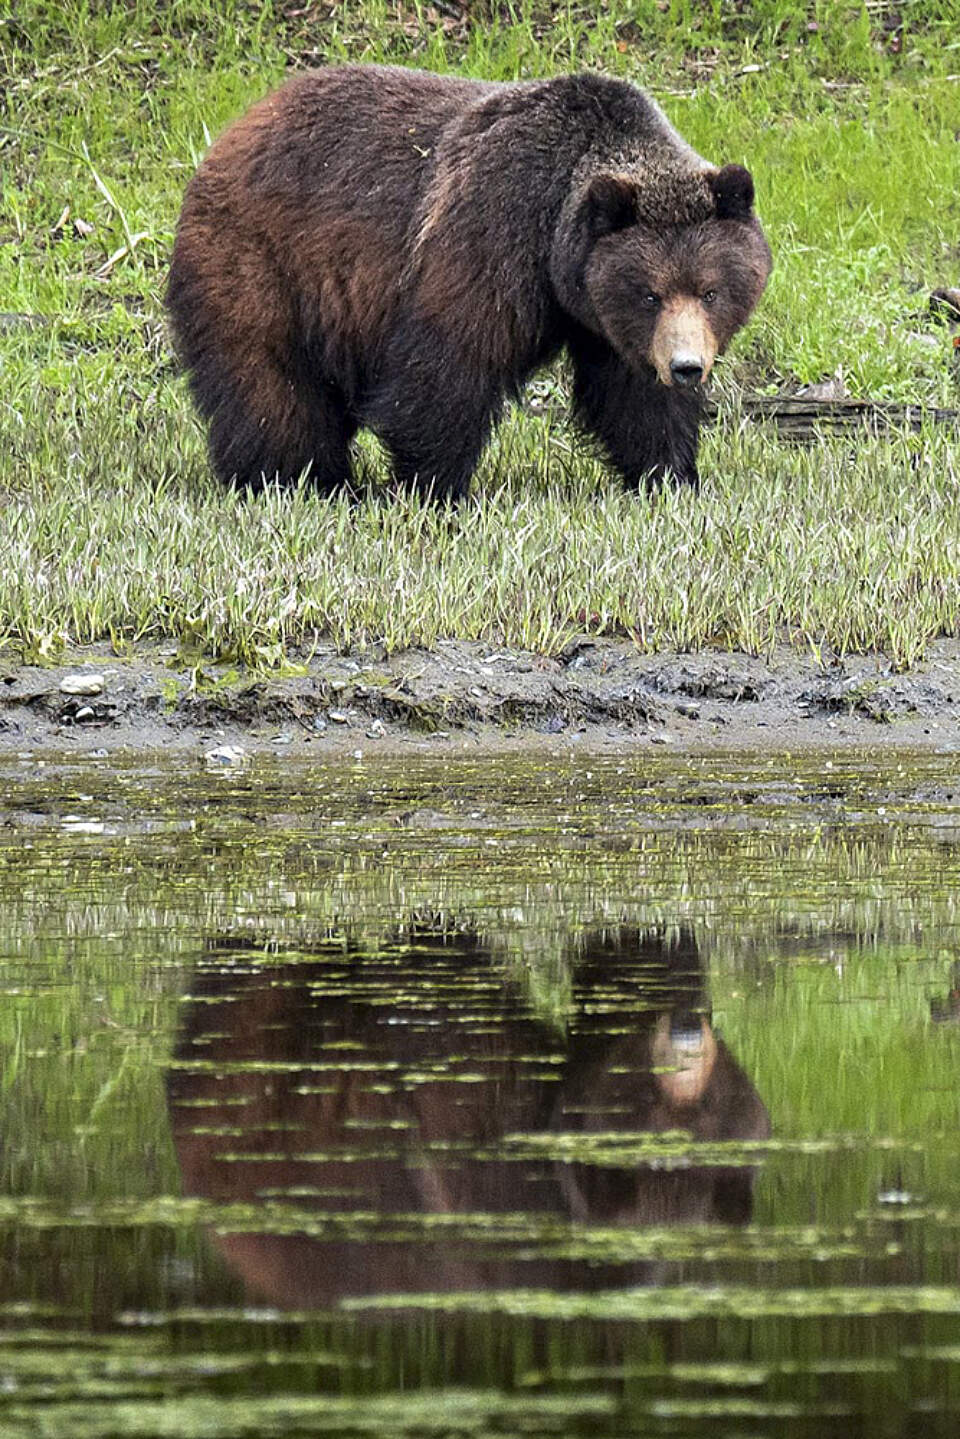 Wild Coast Excursions offers nearly two decades of expertise in guiding bear viewing tours